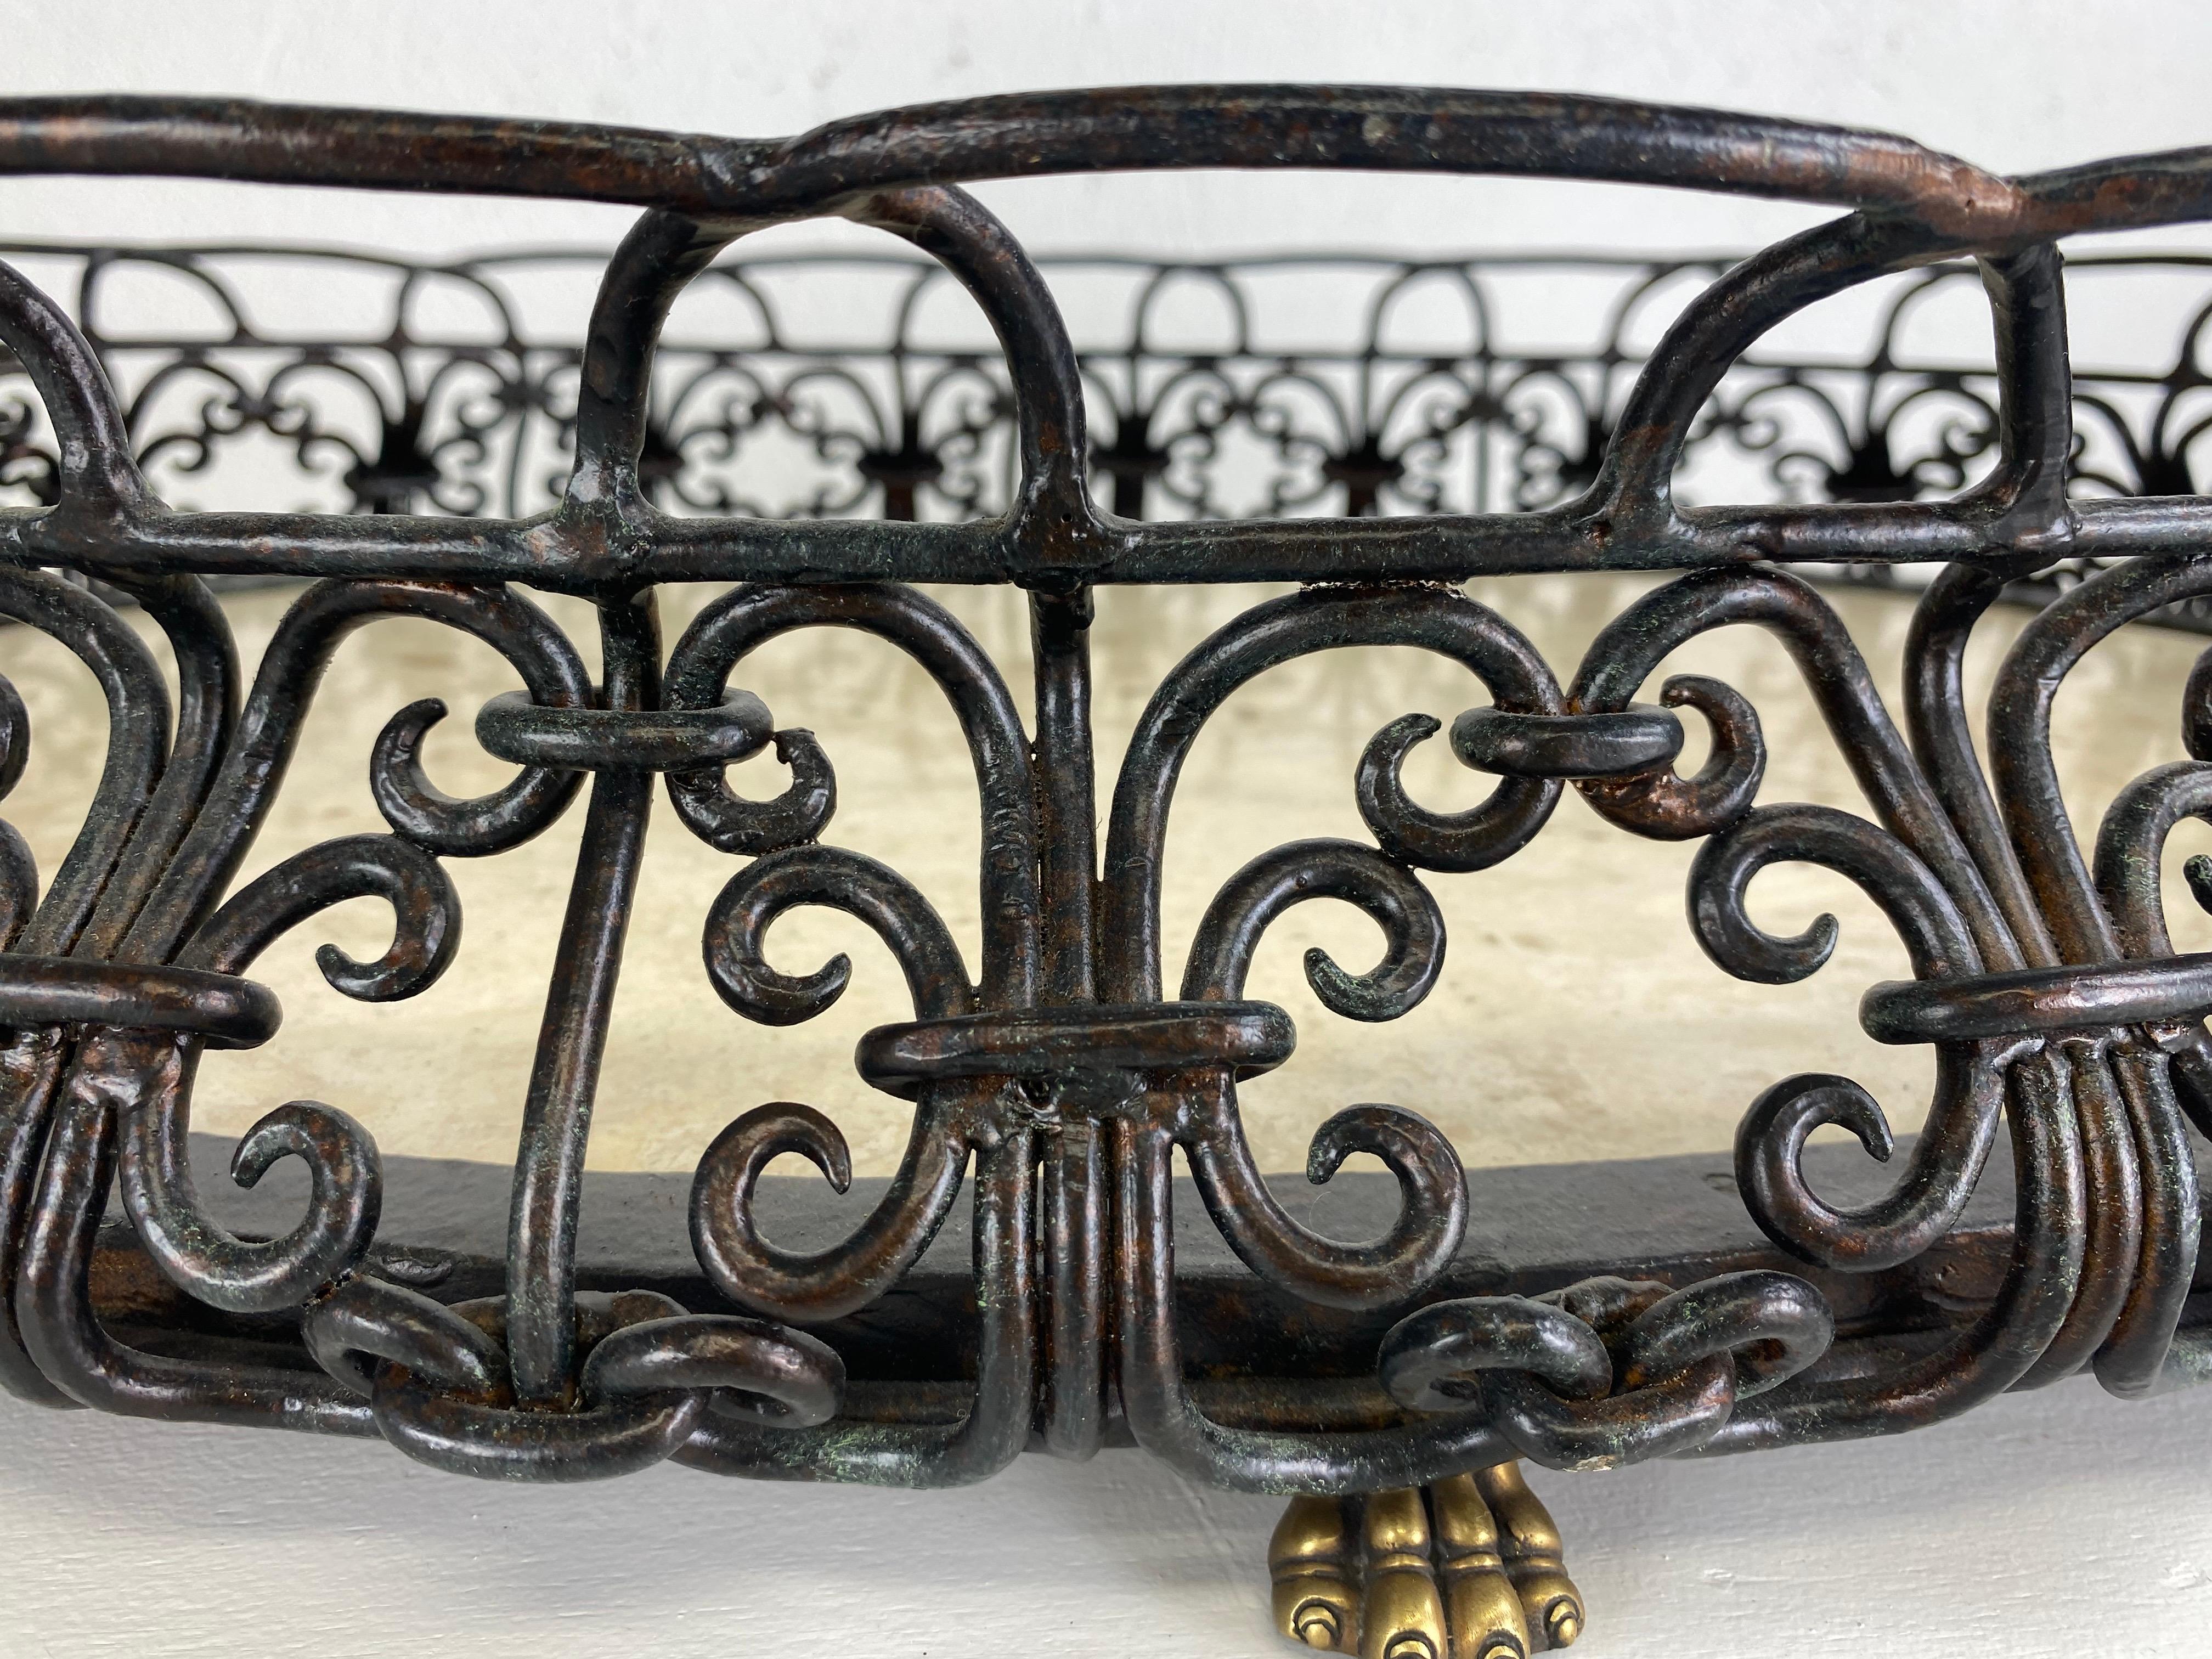 This is a late 20th century hand wrought iron French style serving tray by Maitland Smith. The serving tray has hand wrought iron delicately shaped into a Bombay form around the entire edge of the inlaid marble. This beautiful tray stands on four